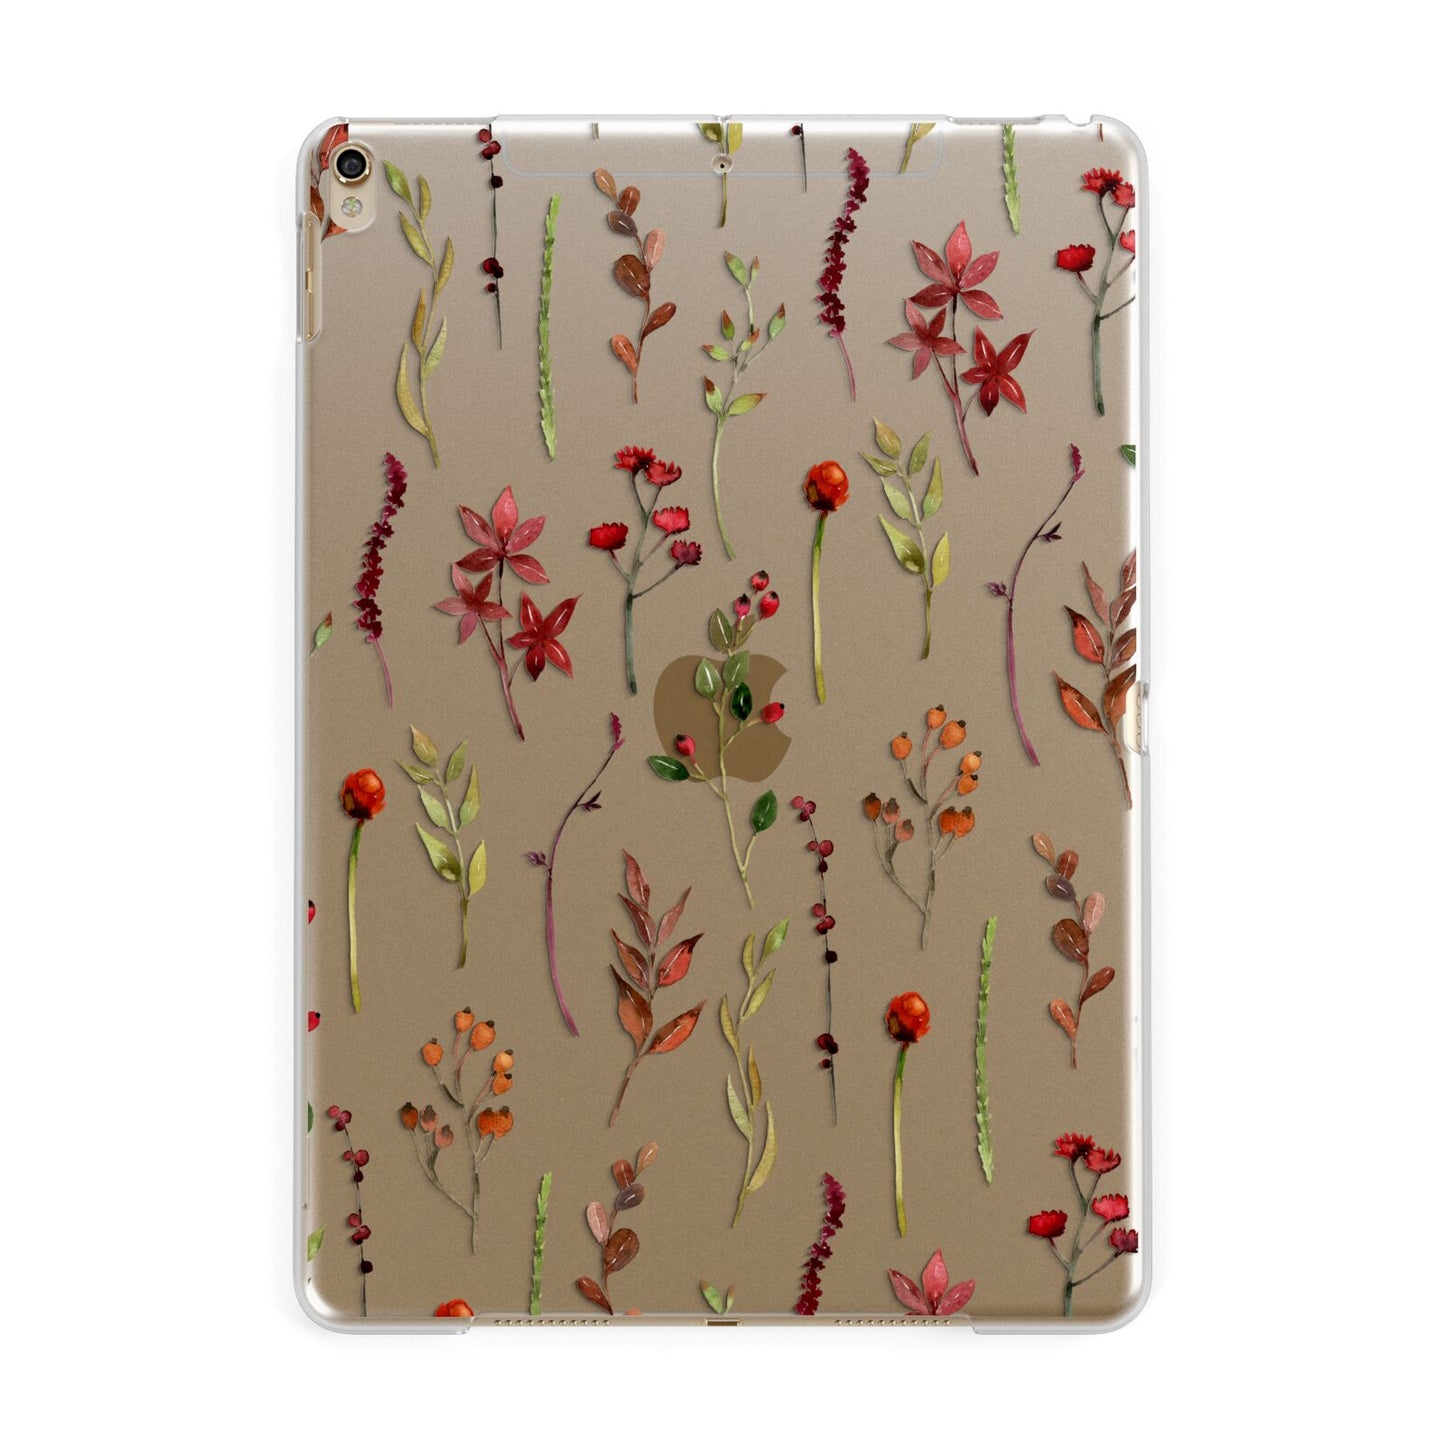 Watercolour Flowers and Foliage Apple iPad Gold Case